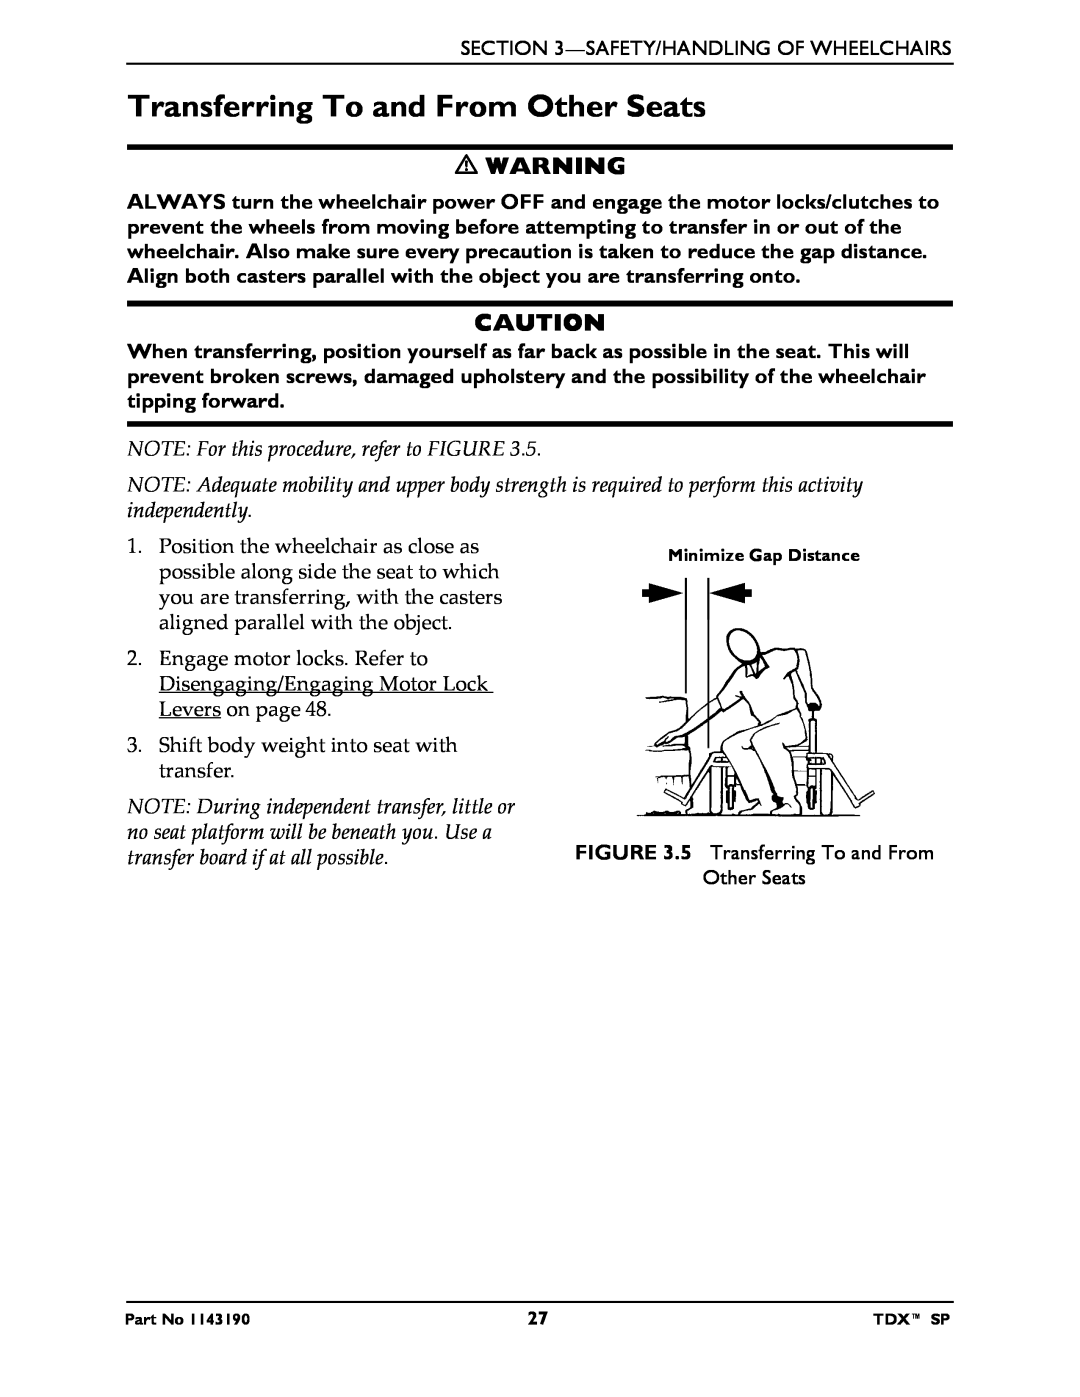 Invacare SP manual Transferring To and From Other Seats, NOTE For this procedure, refer to FIGURE 